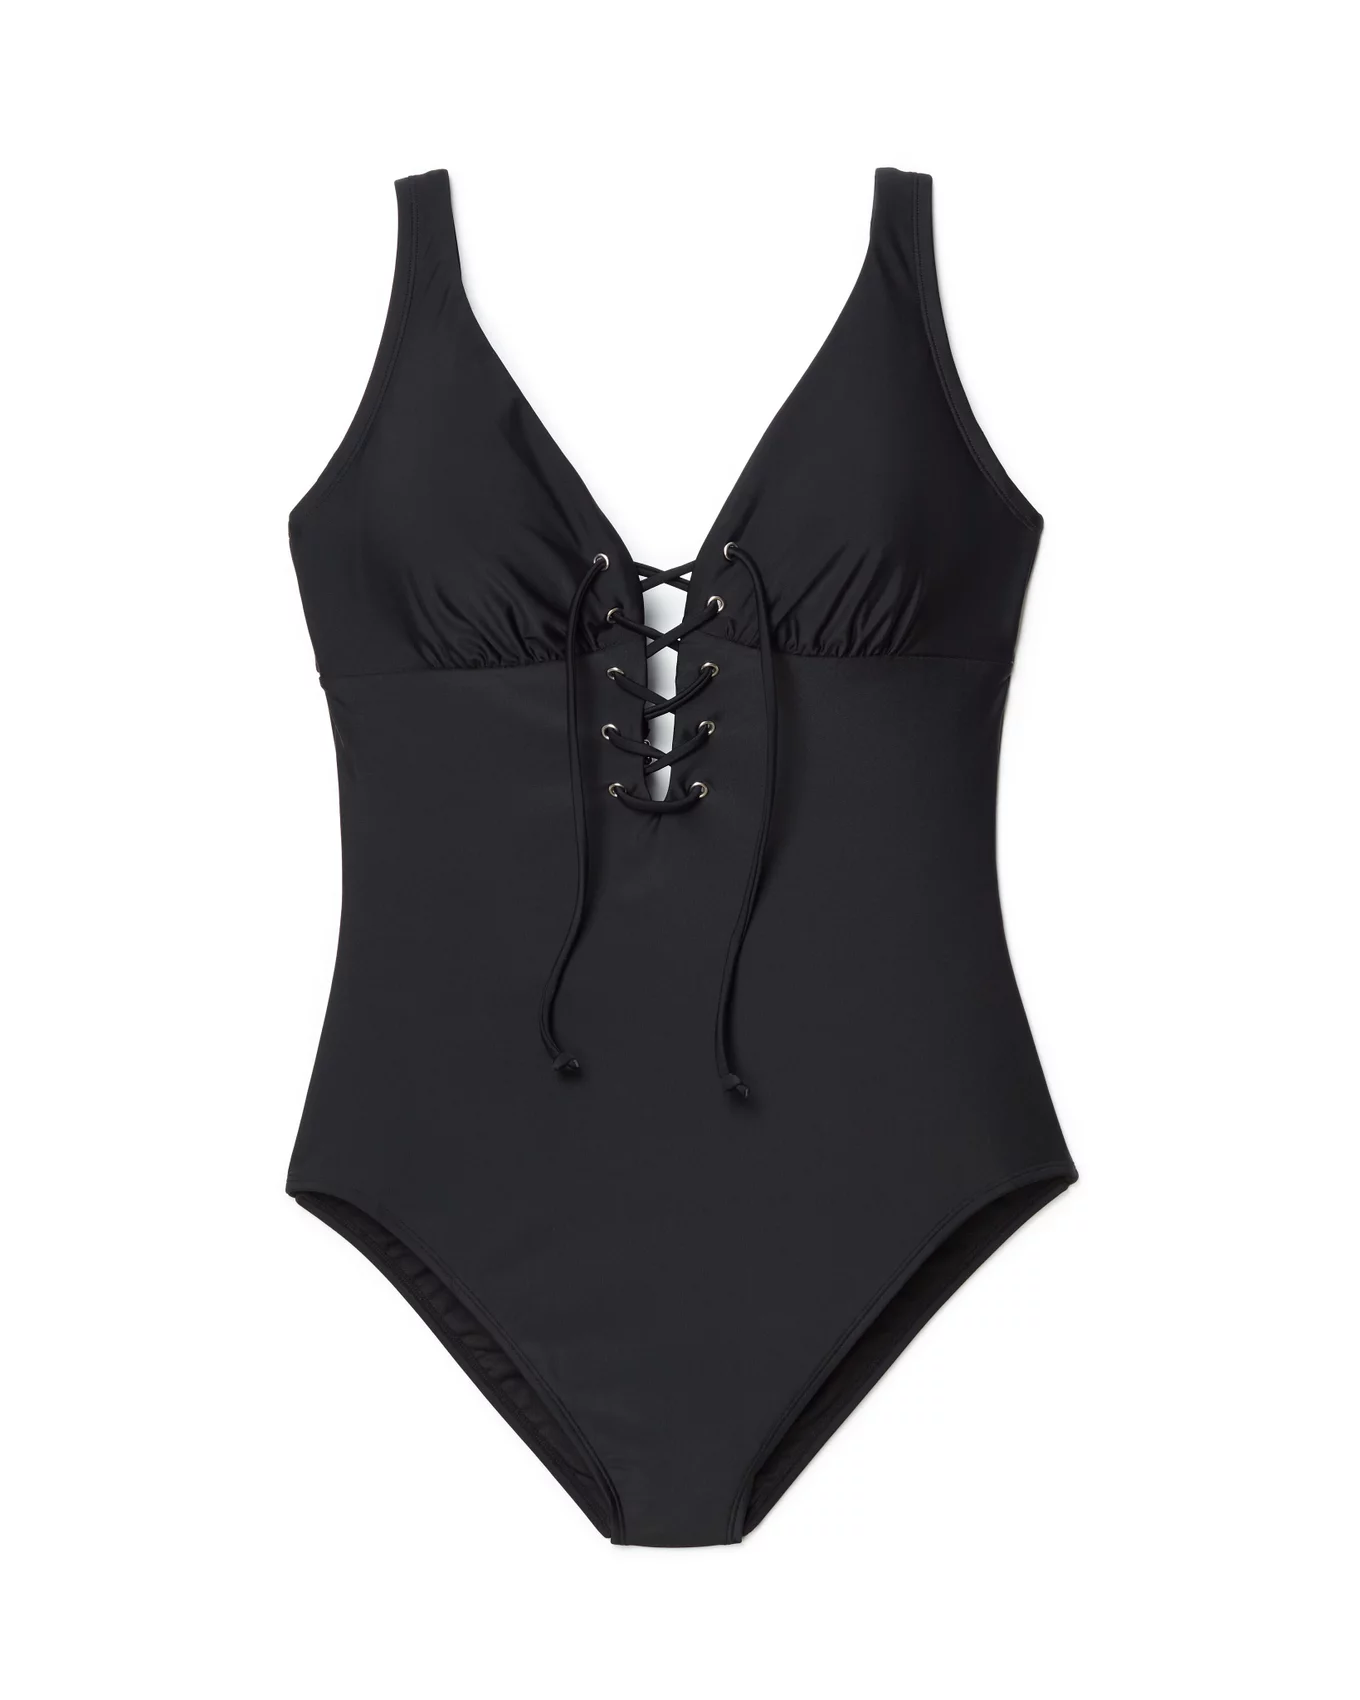 Lace-Up Strappy One-Piece Swimsuit in Black Beauty